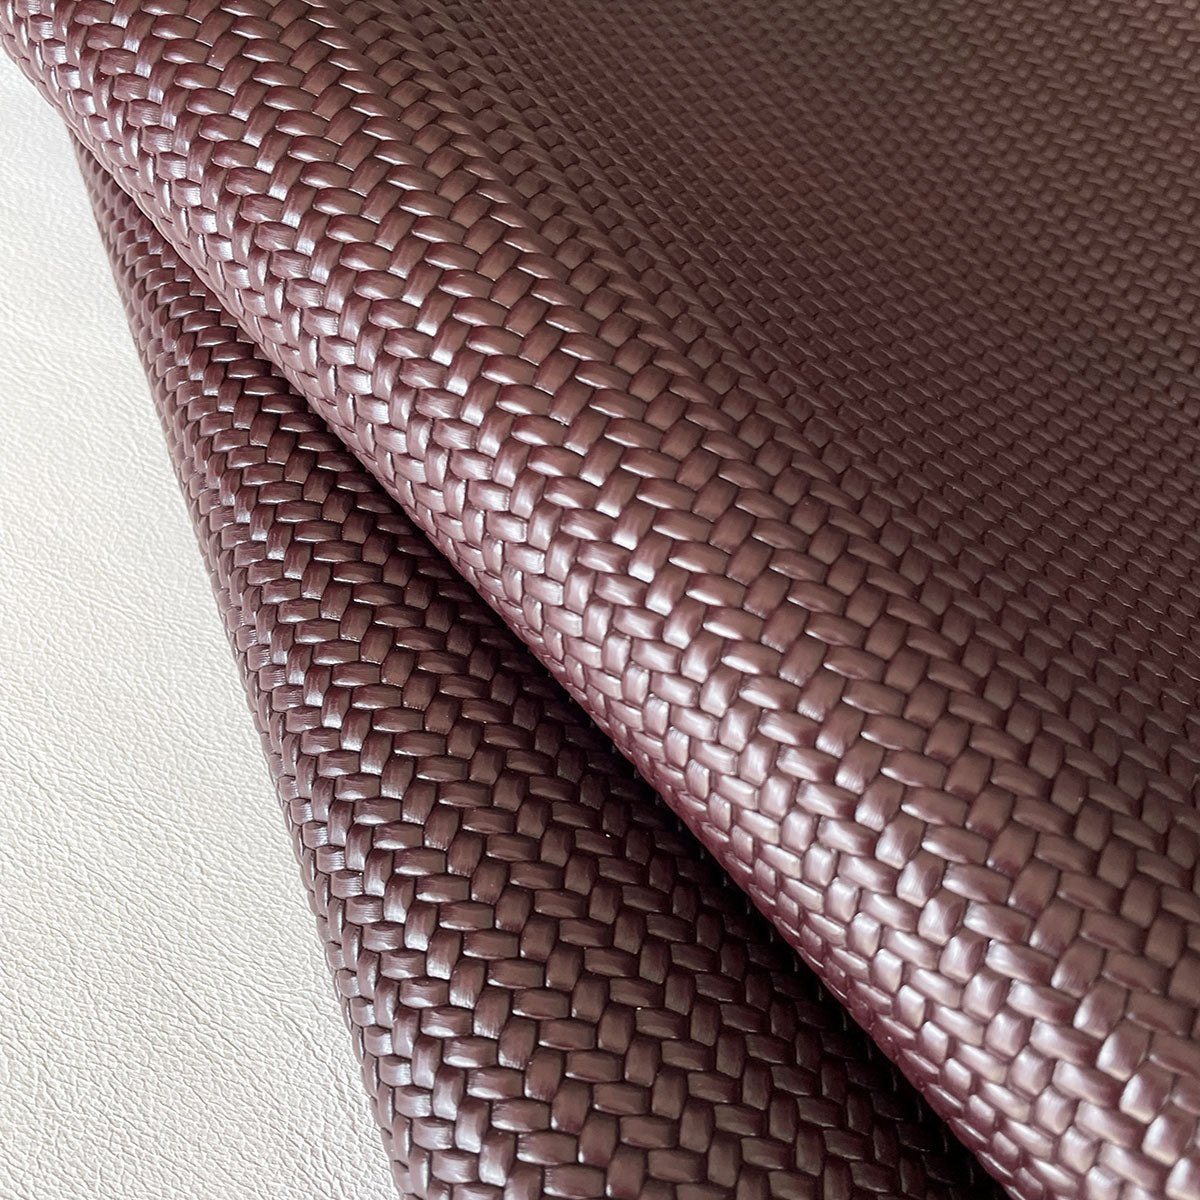 Bordeux Woven Stamped Leather | Leather Hide Store | Leathercosmos ...